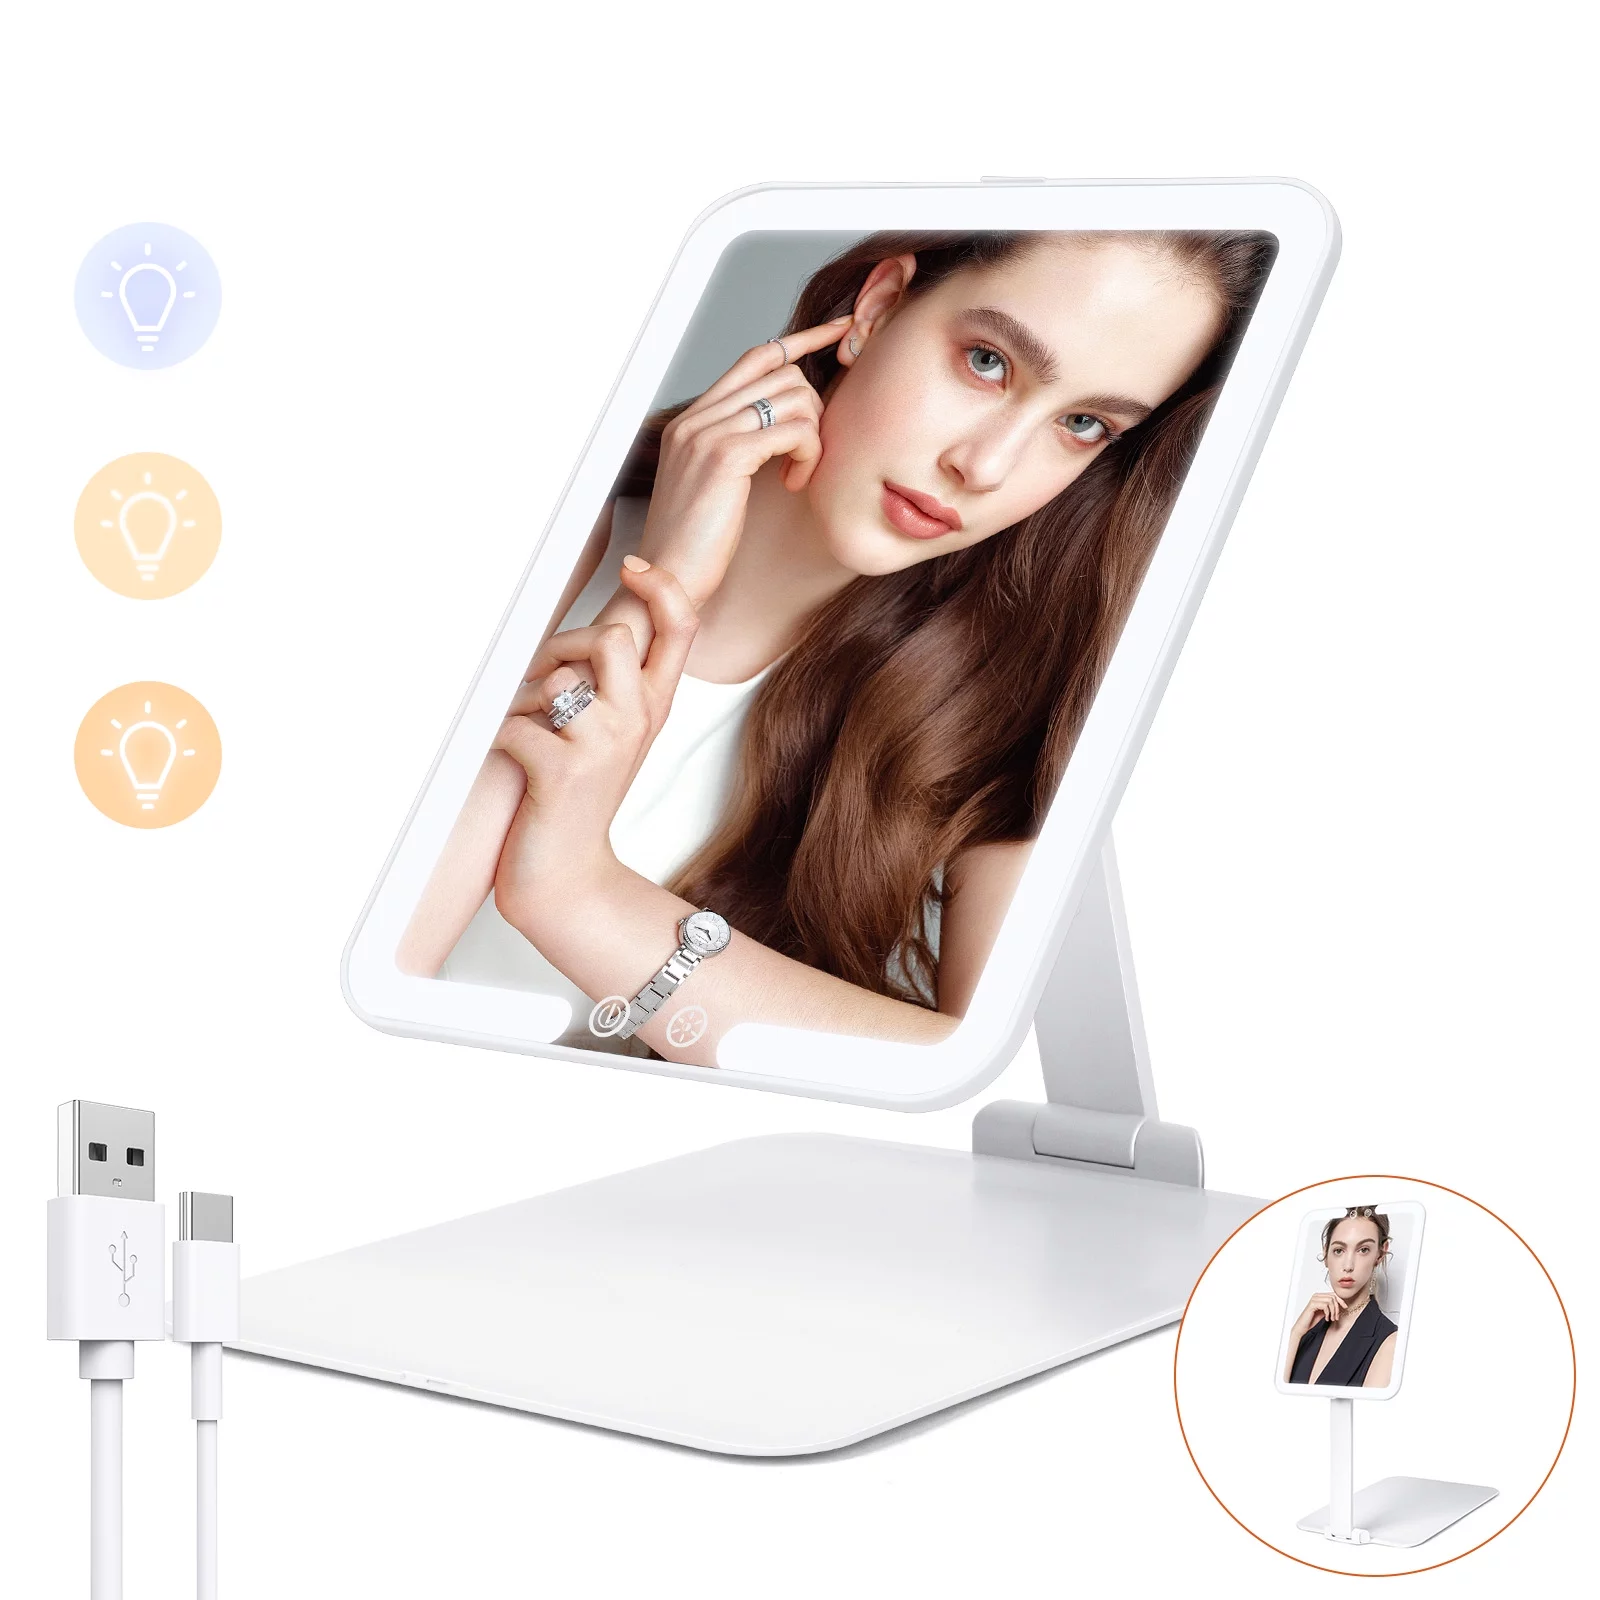 MATEPROX Lighted Makeup Mirror, Extendable Foldable Travel Mirror Compact Tabletop Vanity Height Adjustment